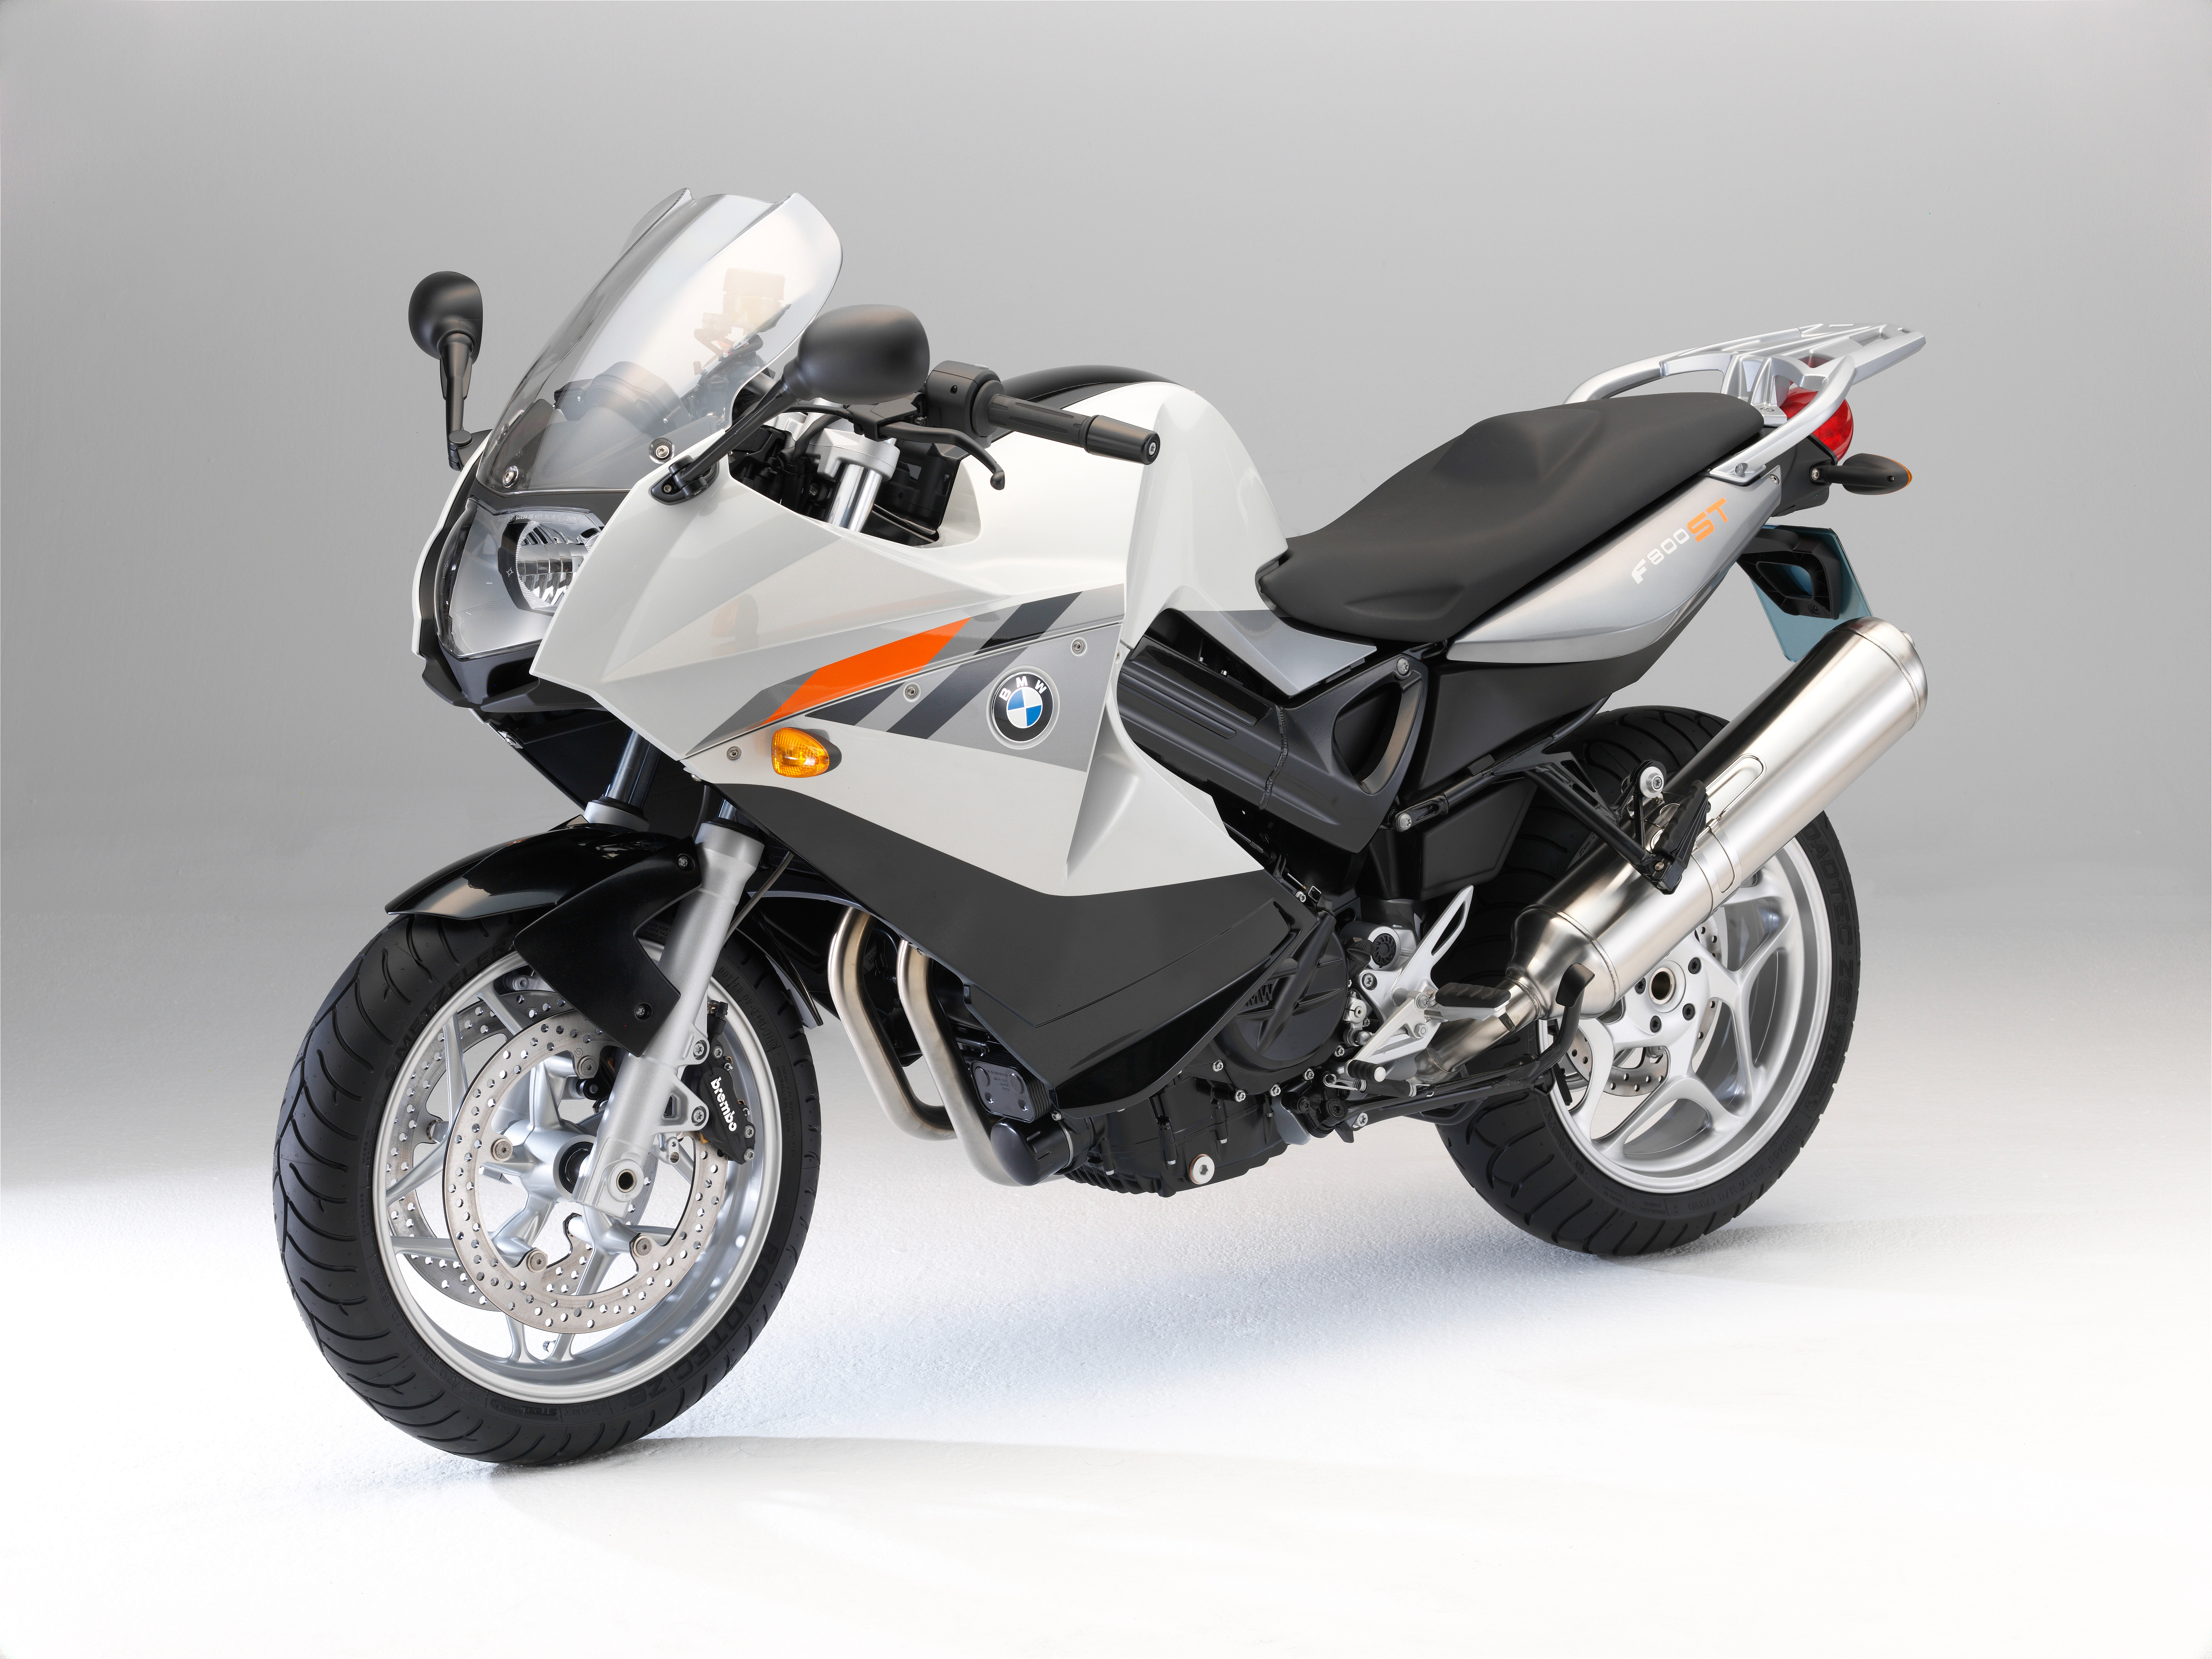 Wallpapers motorcycles BMW motorcycle silver colored on the desktop